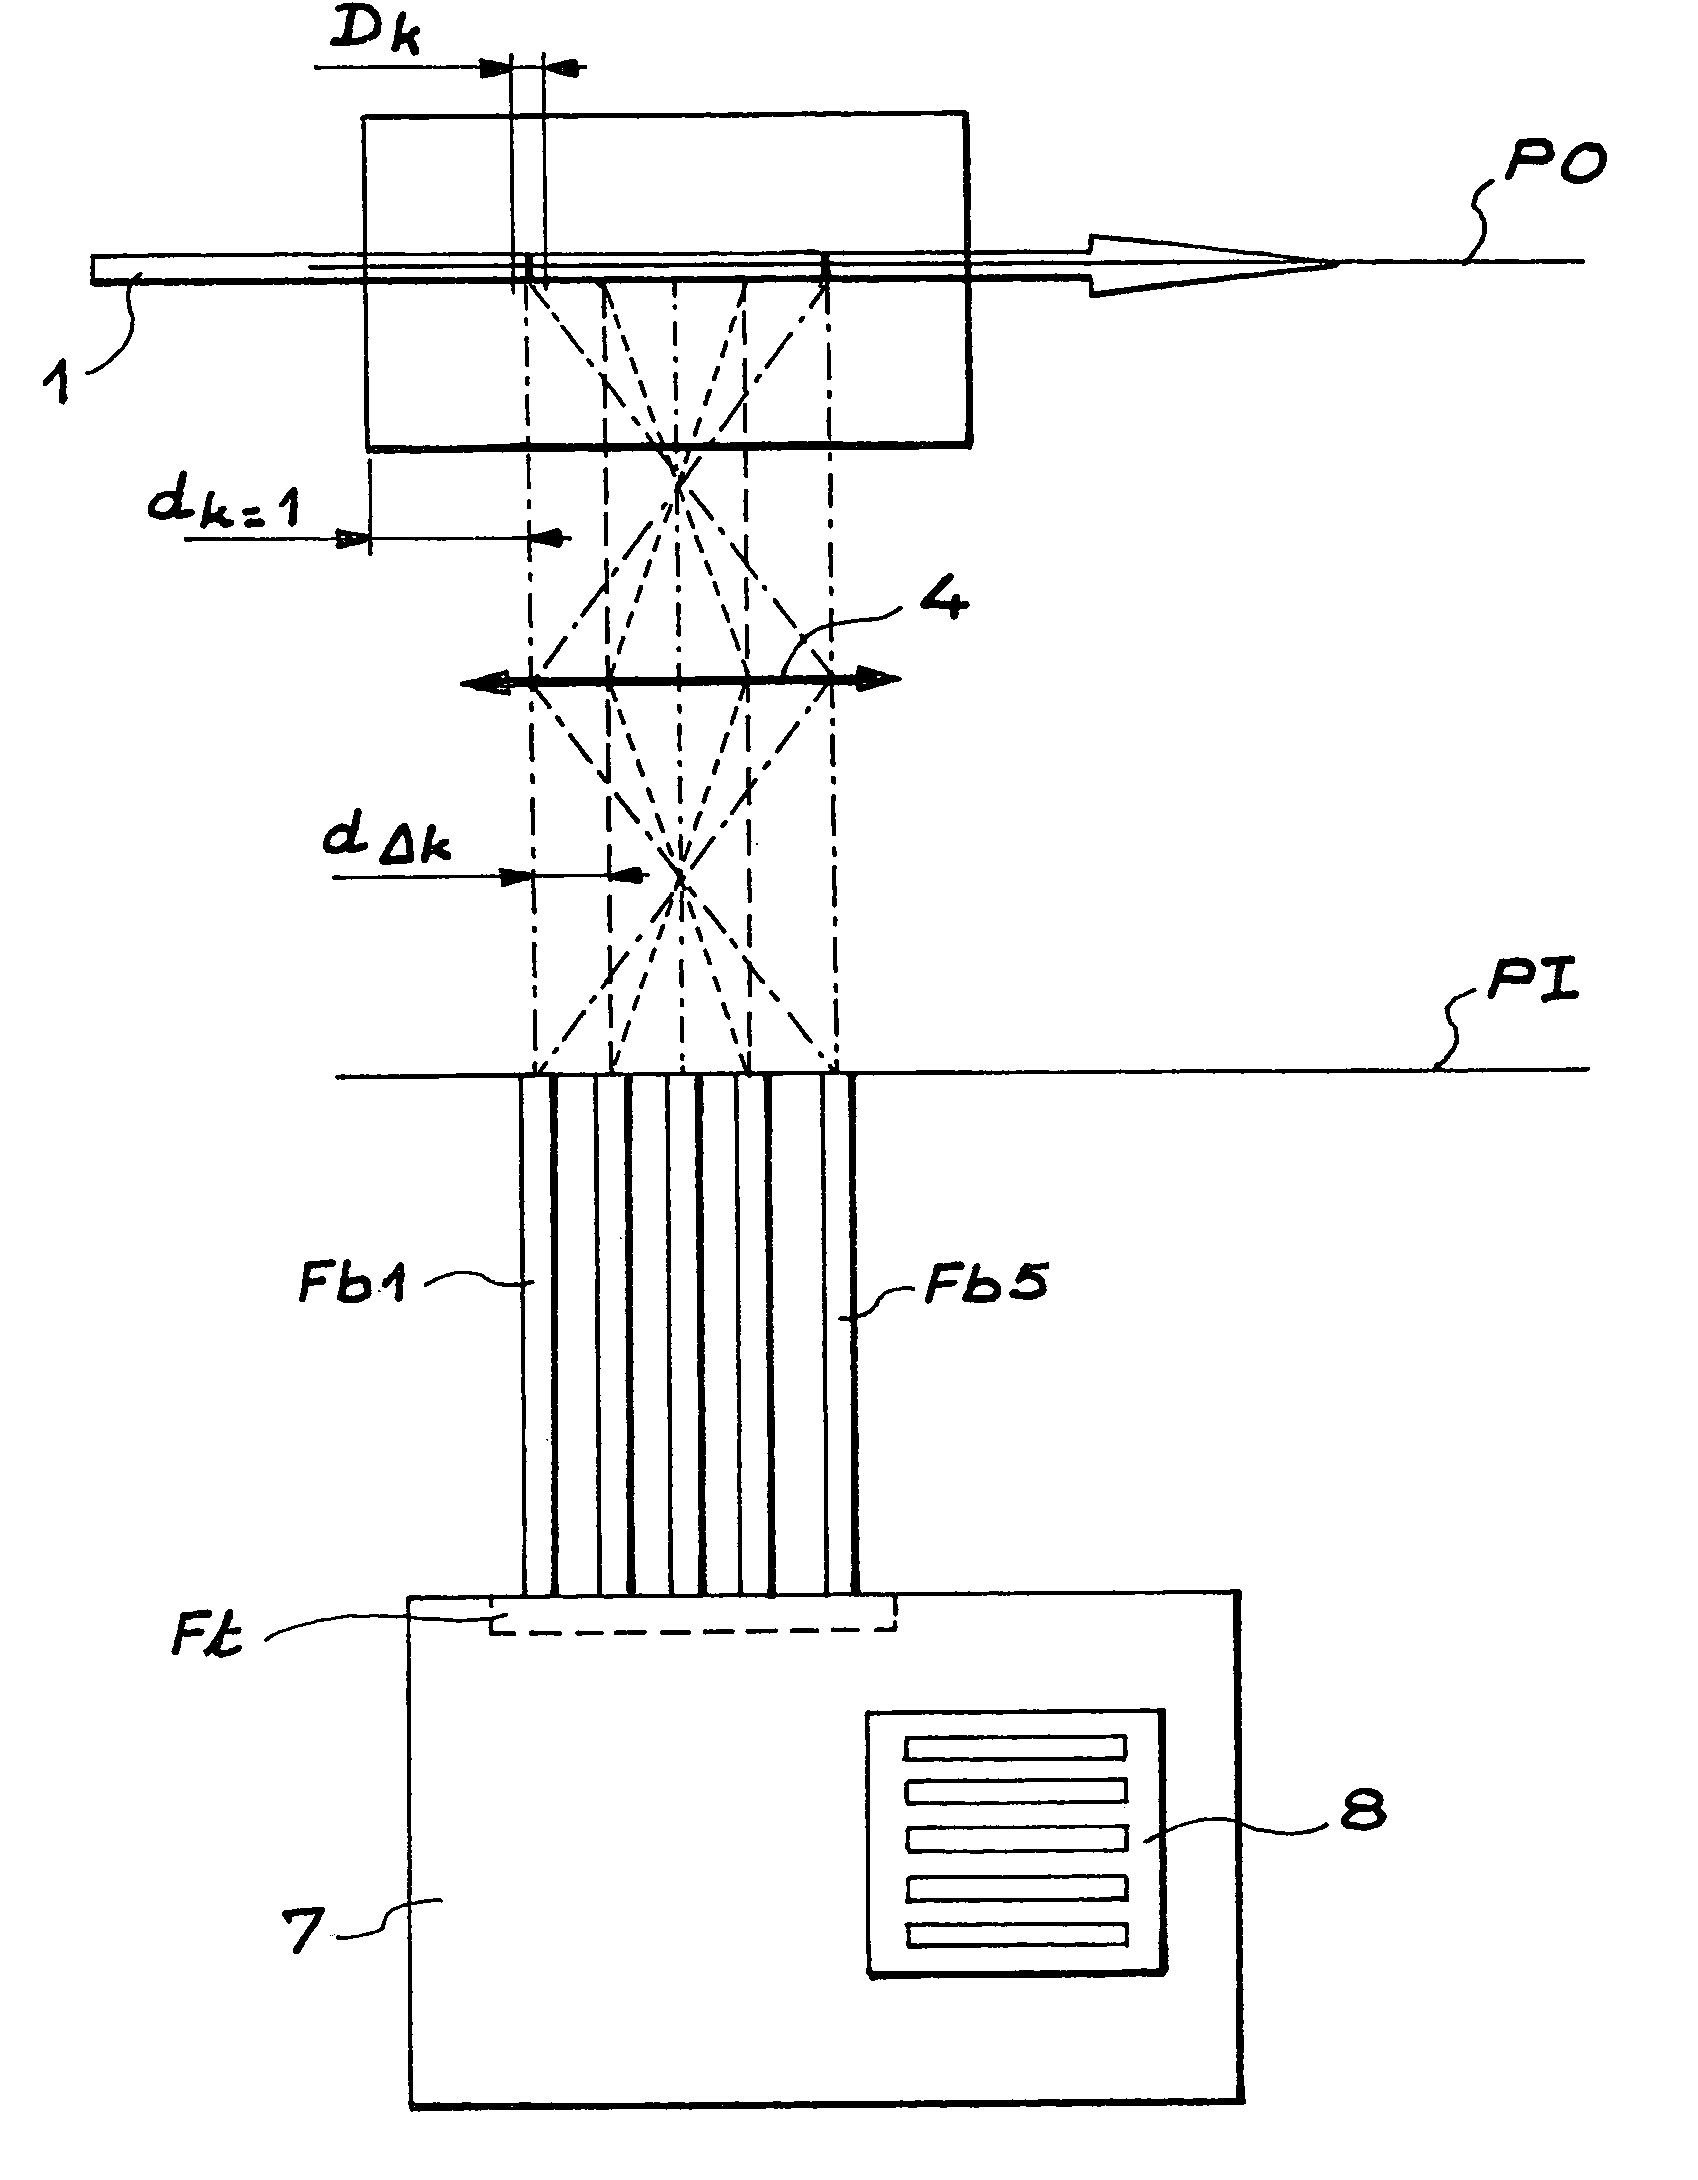 Luminescence measuring device with pre-filter effect suppression